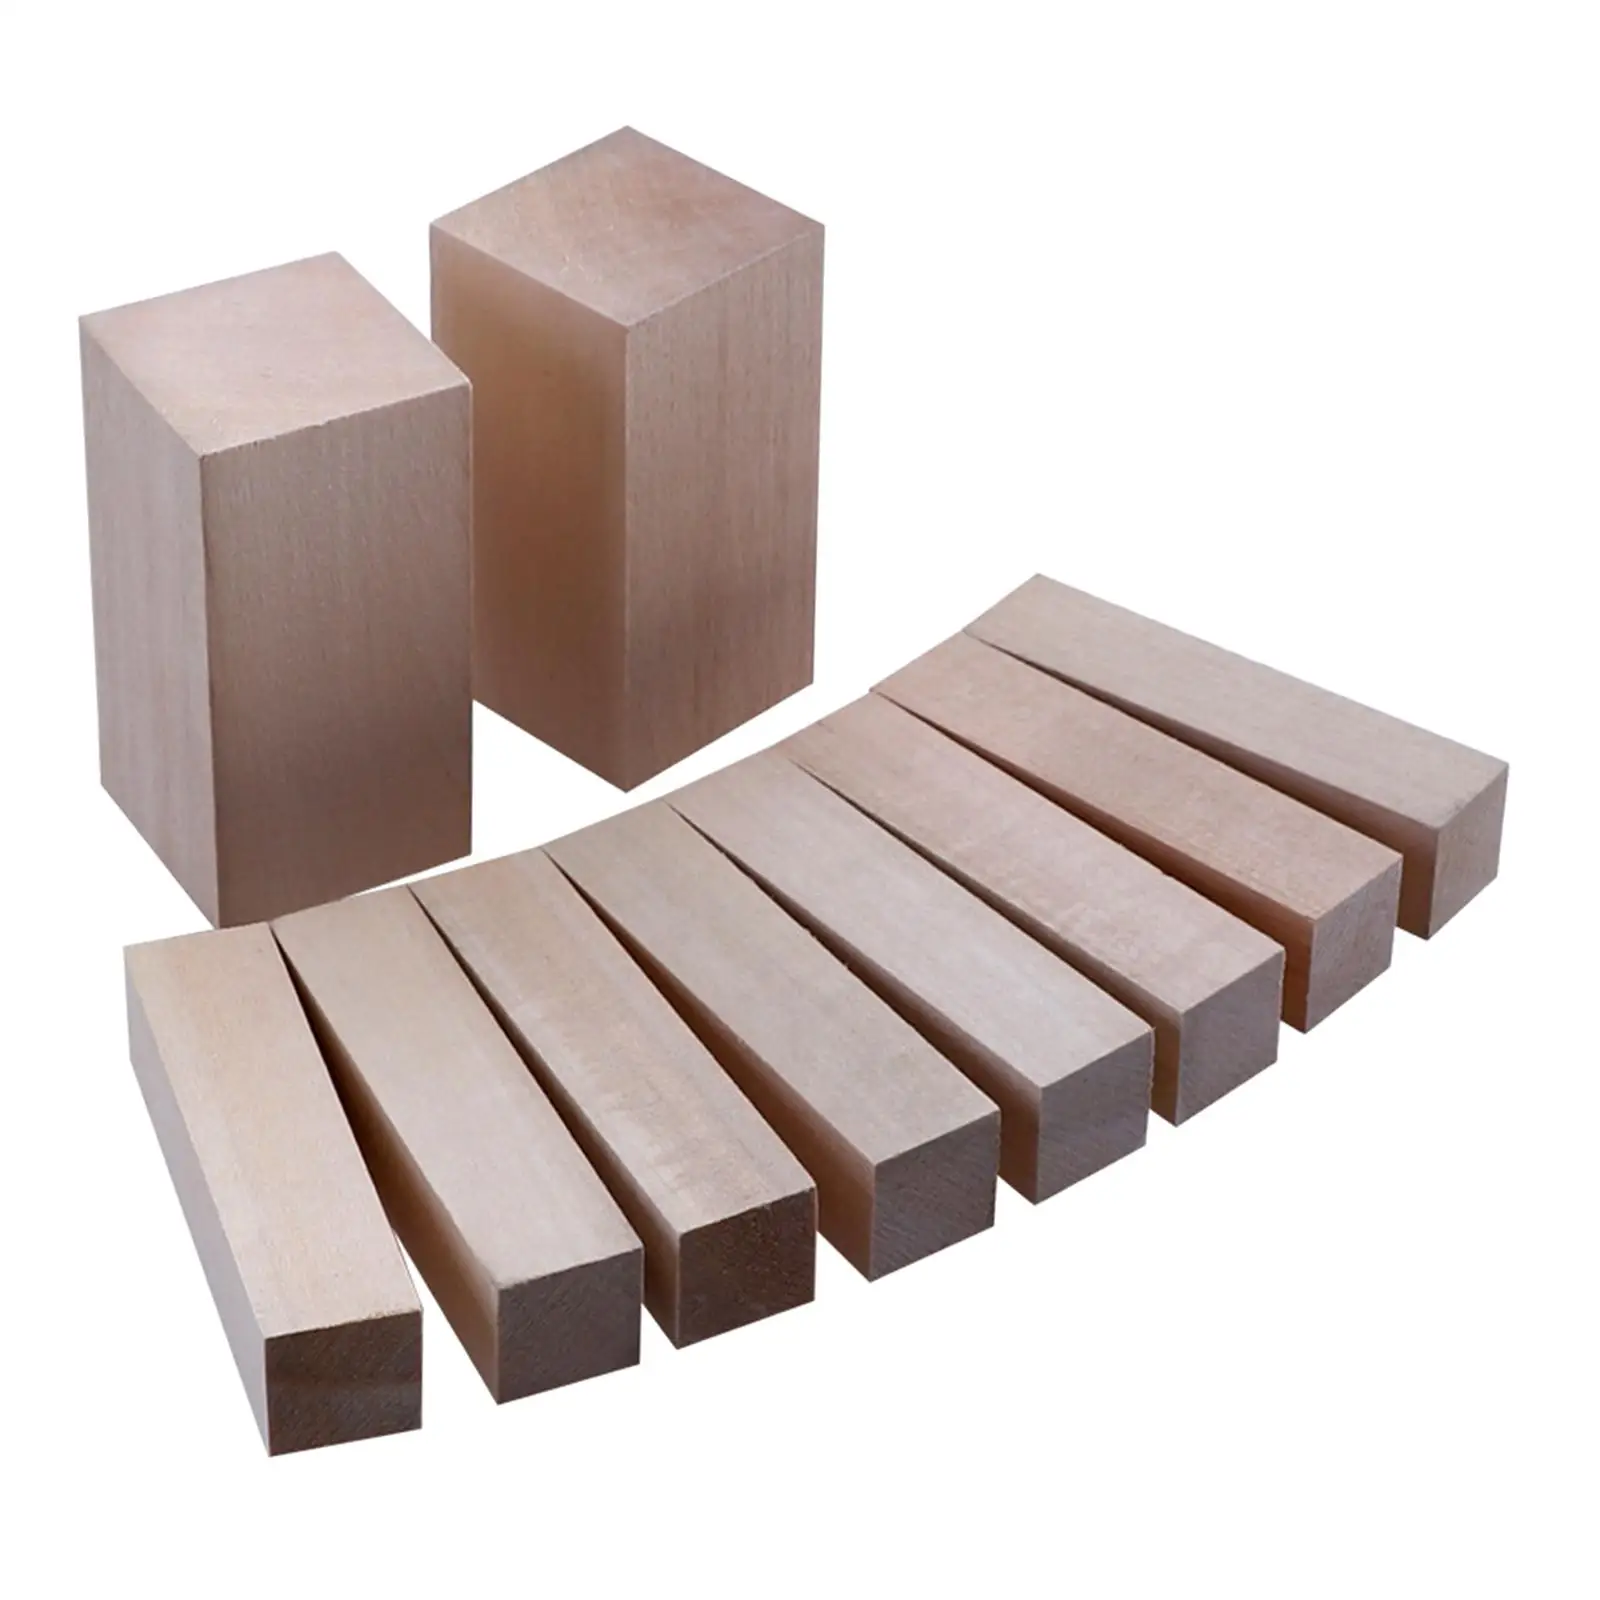 10Pcs Basswood Carving Blocks Unfinished Wood Blocks Linden Hand Carving Turning Blanks Wood Whittling Kit for Kids Adults